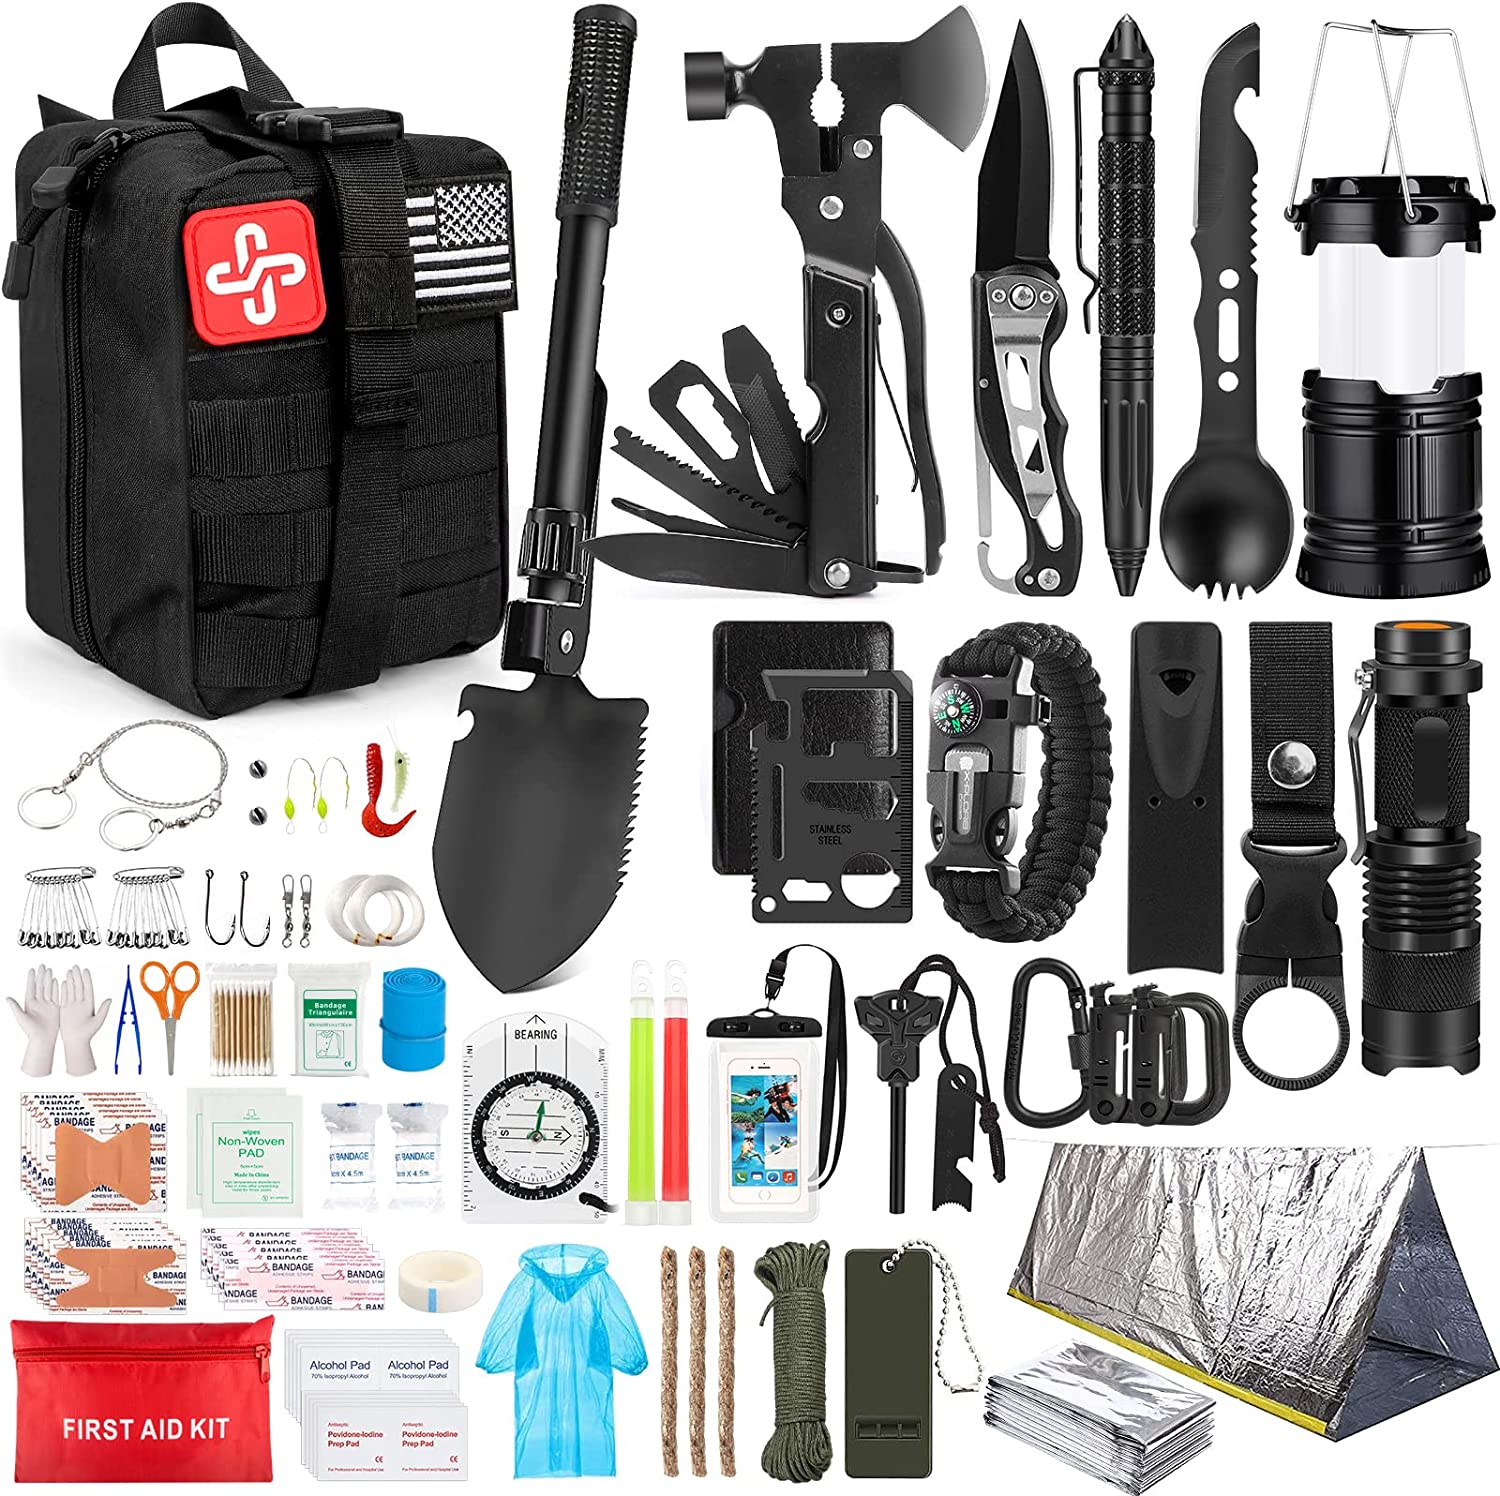 Survival Kit, 250Pcs Survival Gear First Aid Kit with Molle System Compatible Bag and Emergency Tent, Emergency Kit for Earthquake, Outdoor Adventure, Camping, Hiking, Hunting, Gifts for Men Women